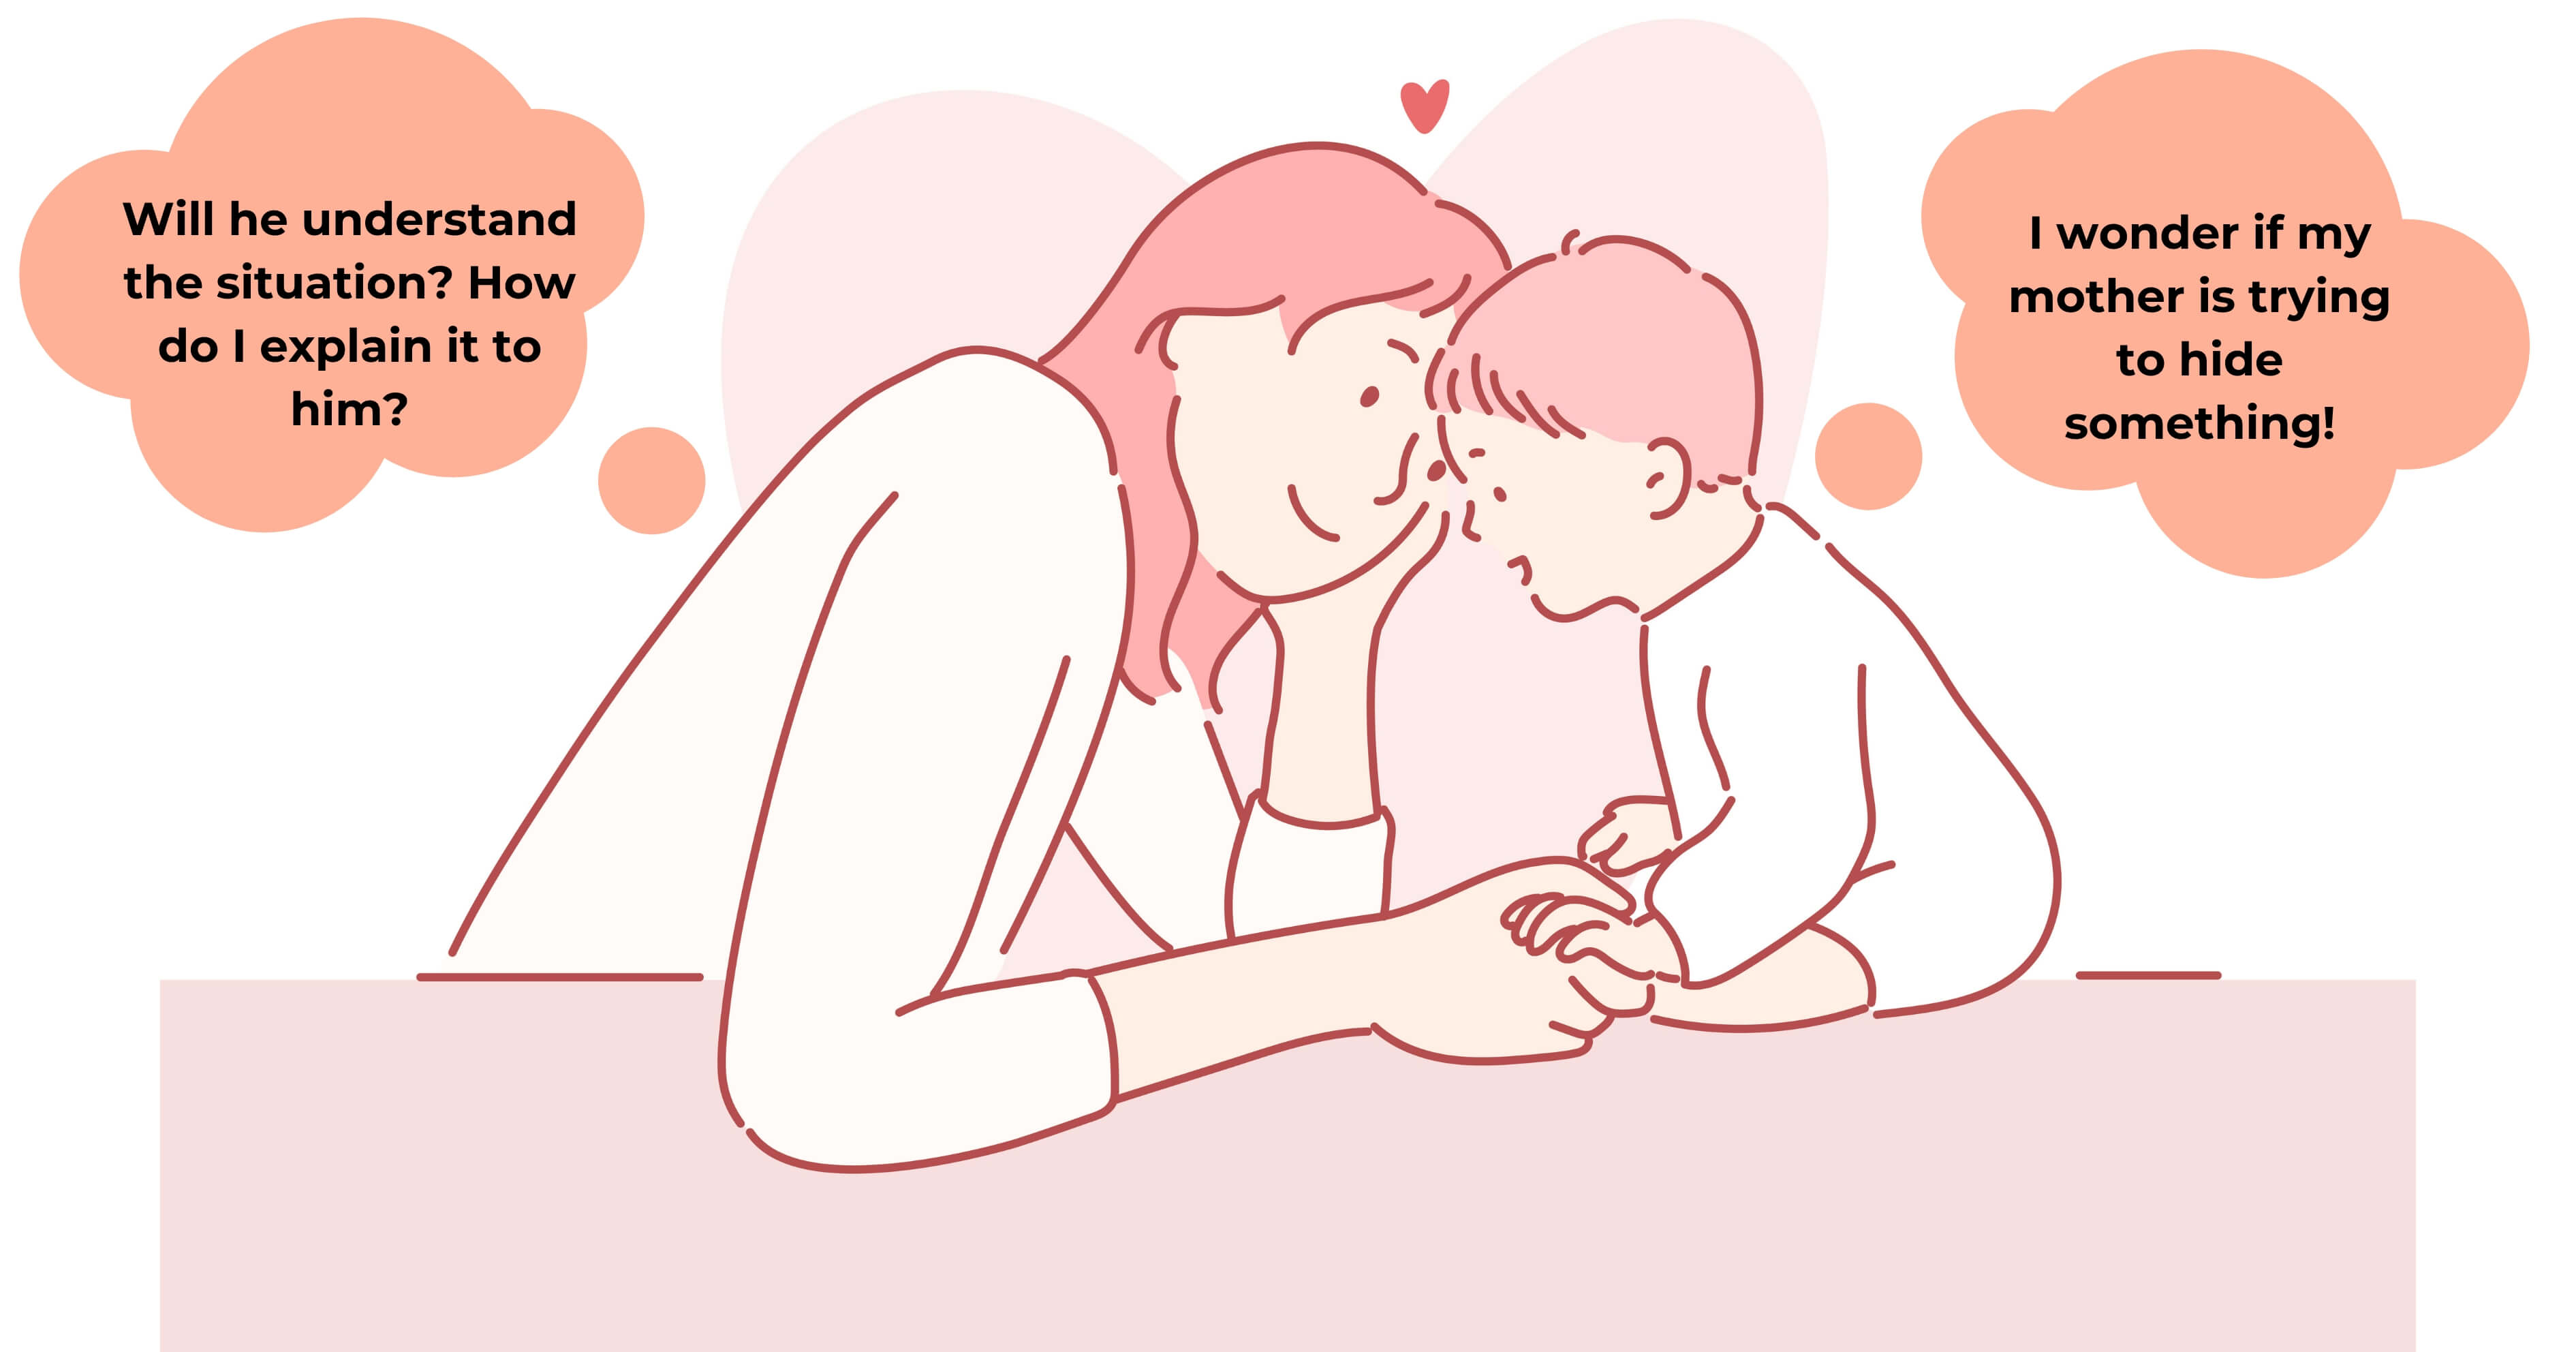 Speaking about your breast cancer with your child